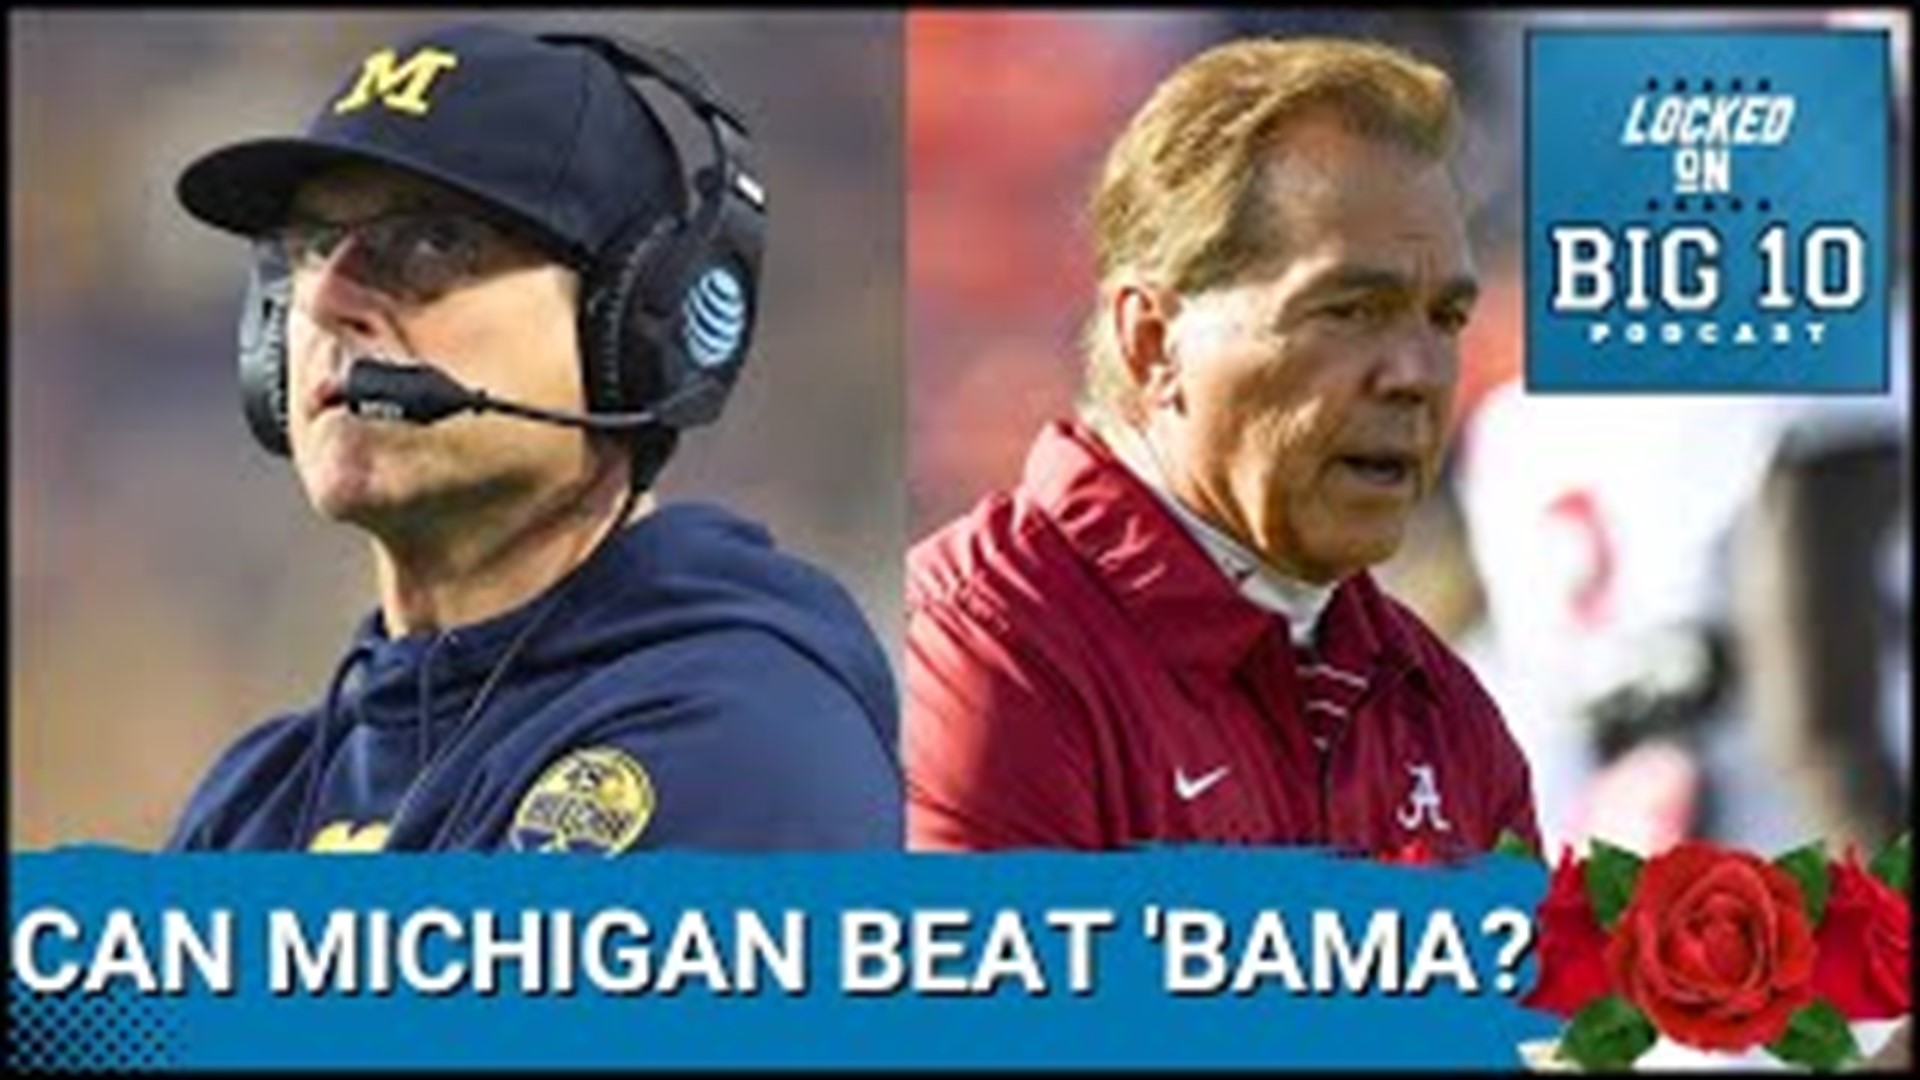 A classic college football blue-blood battle will take place between the Alabama Crimson Tide and the Michigan Wolverines January 1st in the College Football Playoff